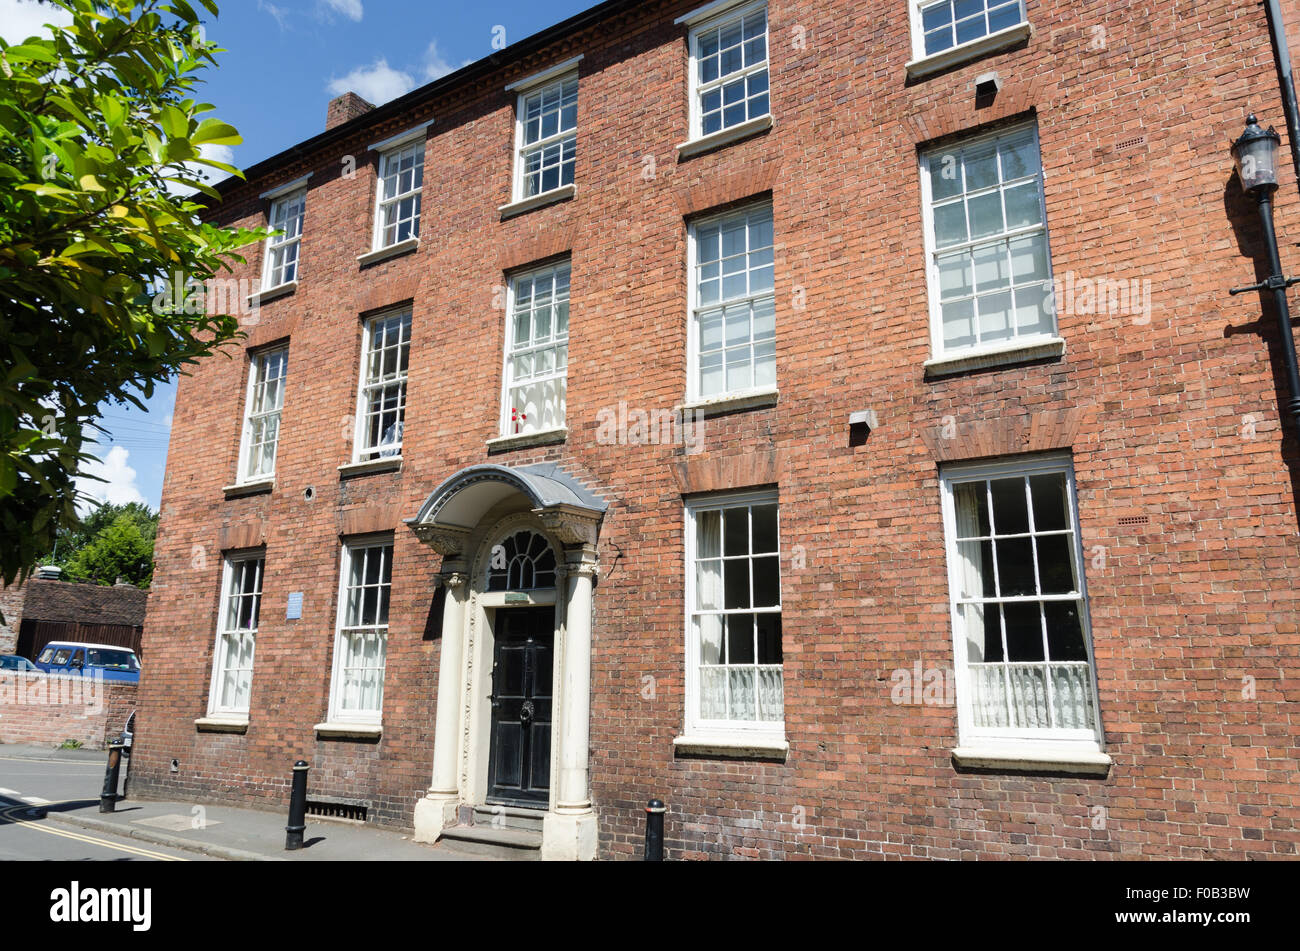 Birth place of former British Prime Minister Stanley Baldwin in the Worcestershire town of Bewdley. Stock Photo